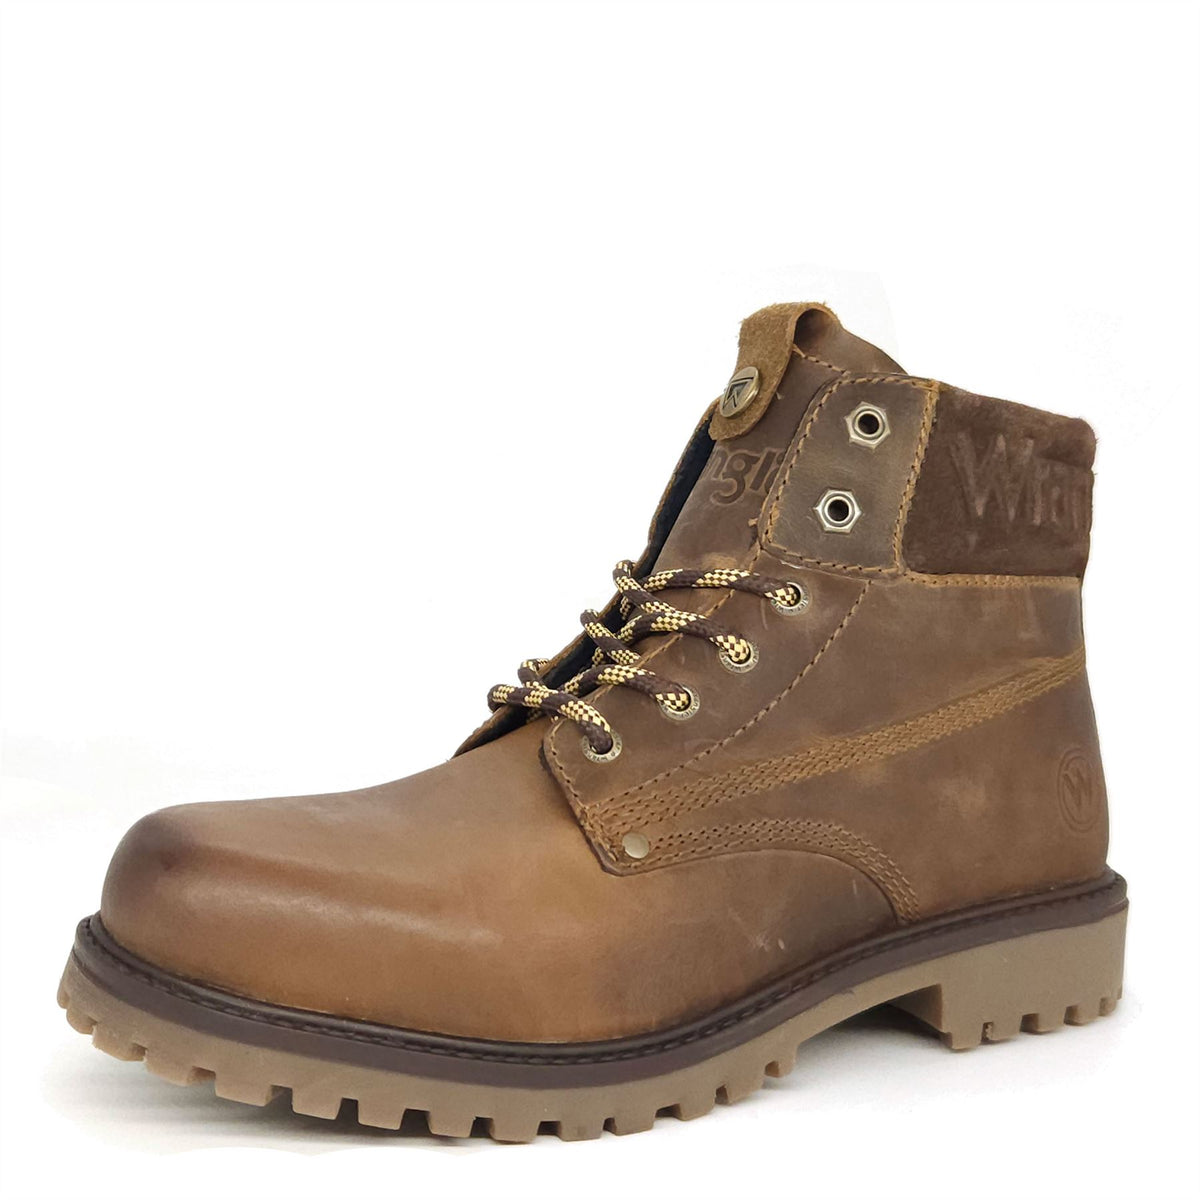 Wrangler Arch Lace Up Boots